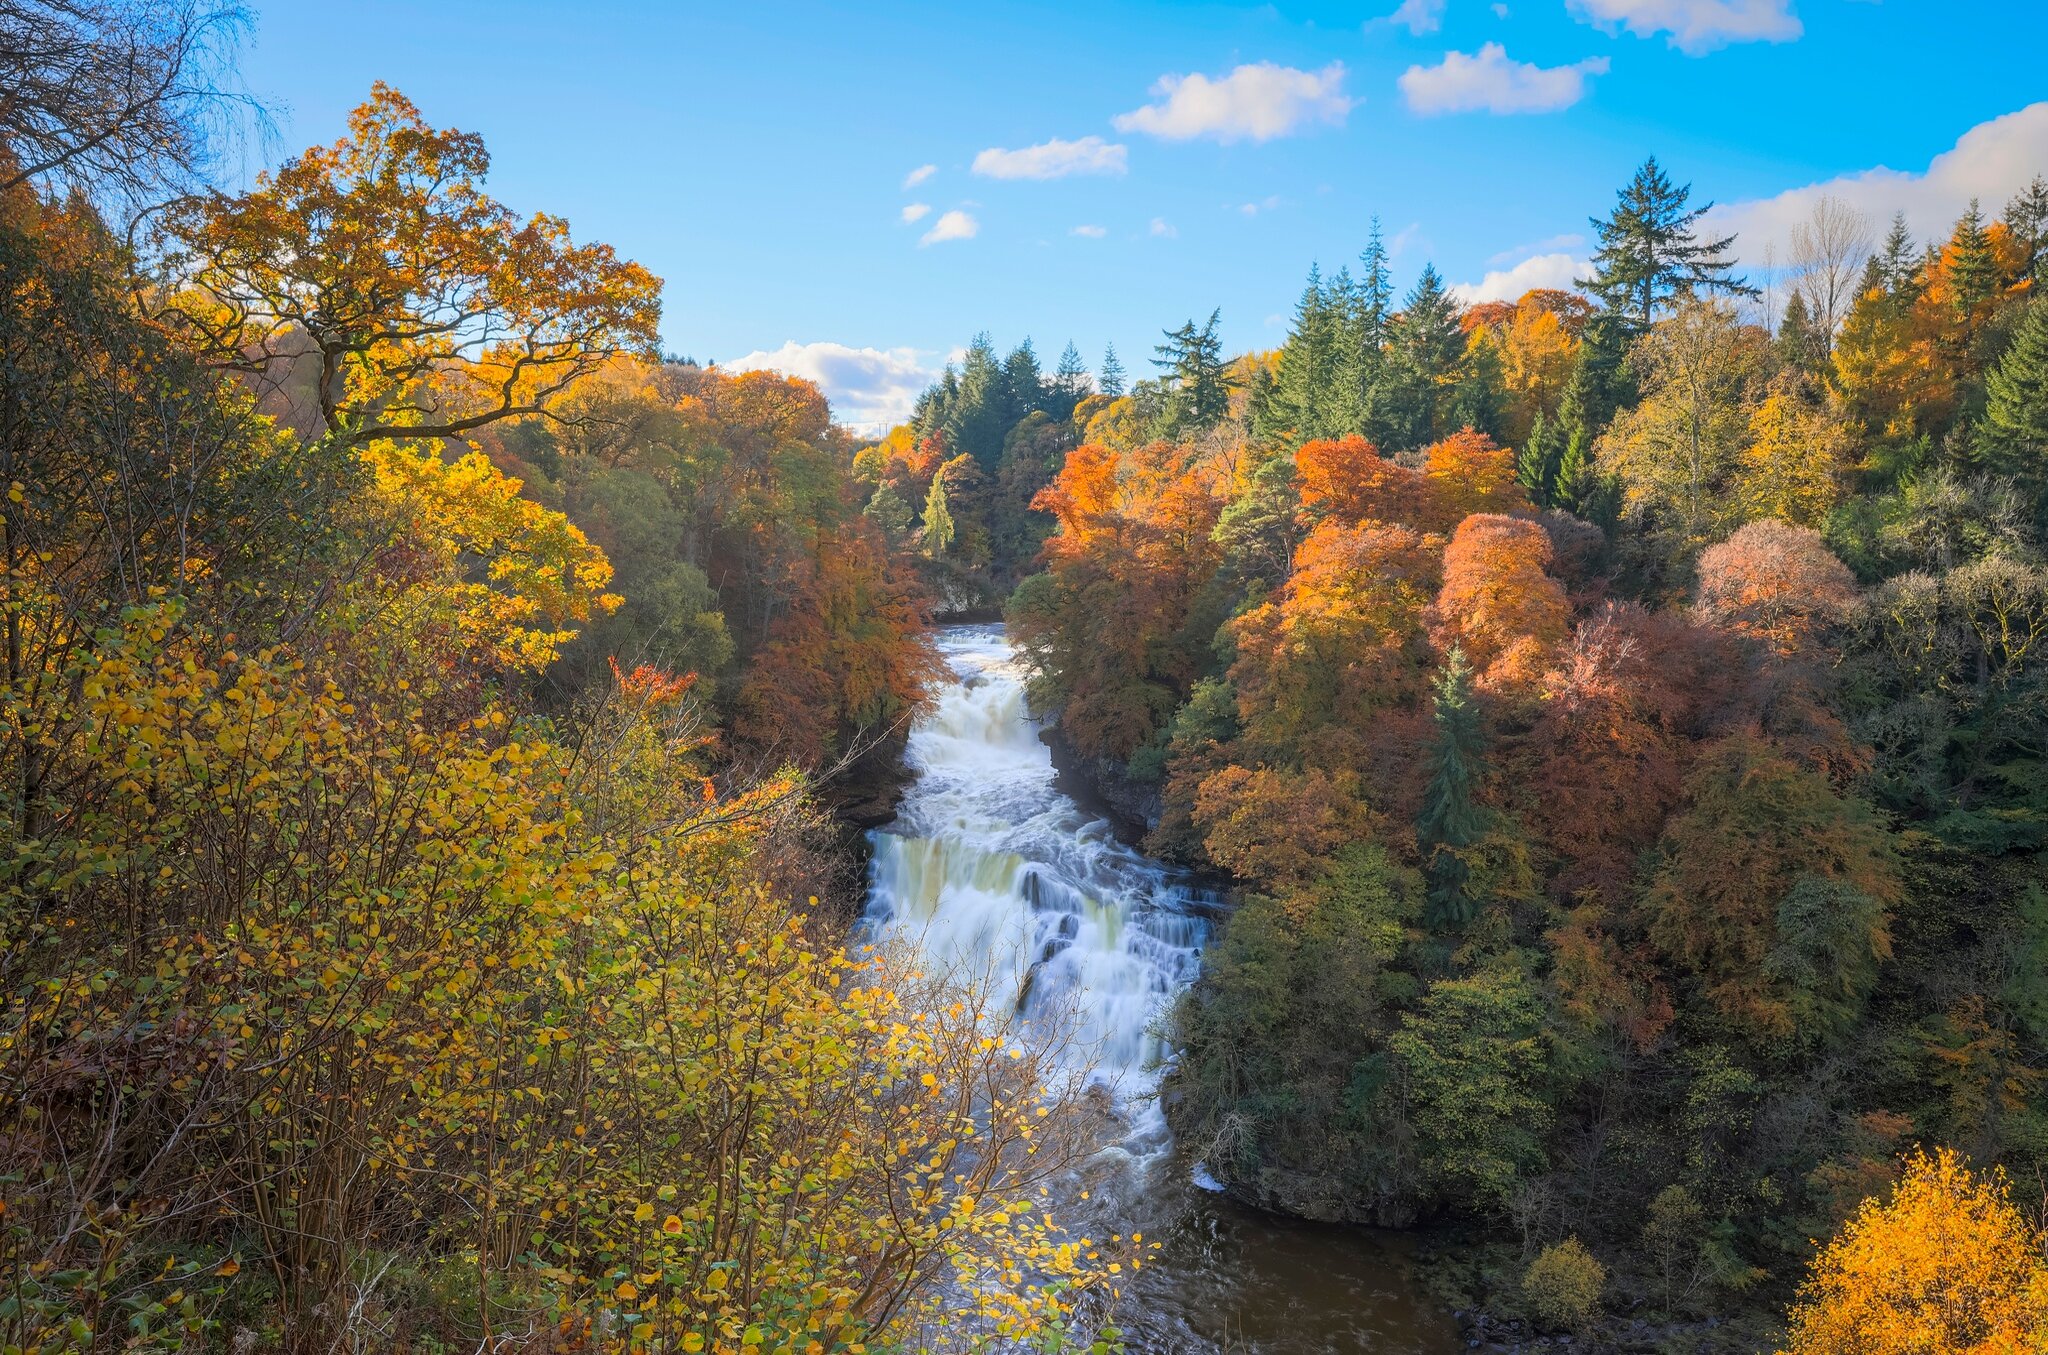 The Falls of Clyde Wildlife Reserve in autumn located within the World Heritage Site of New Lanark.